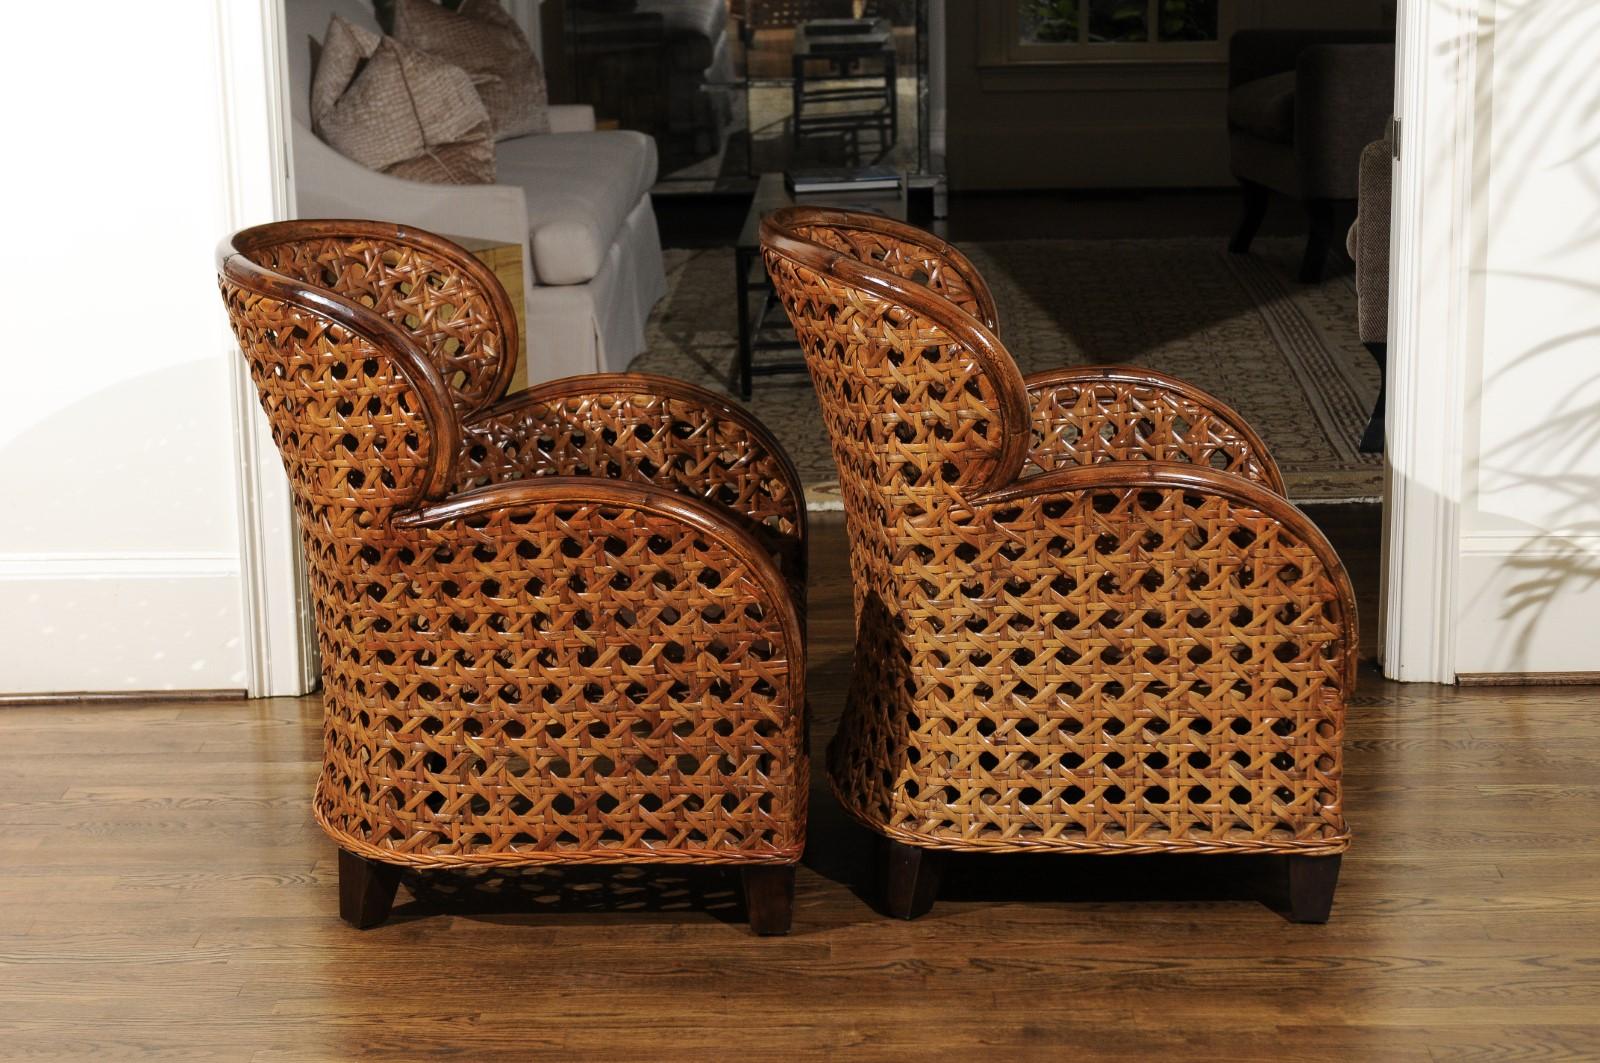 Radiant Pair of Art Deco Revival Club Chairs in Magnificent French Cane In Excellent Condition For Sale In Atlanta, GA